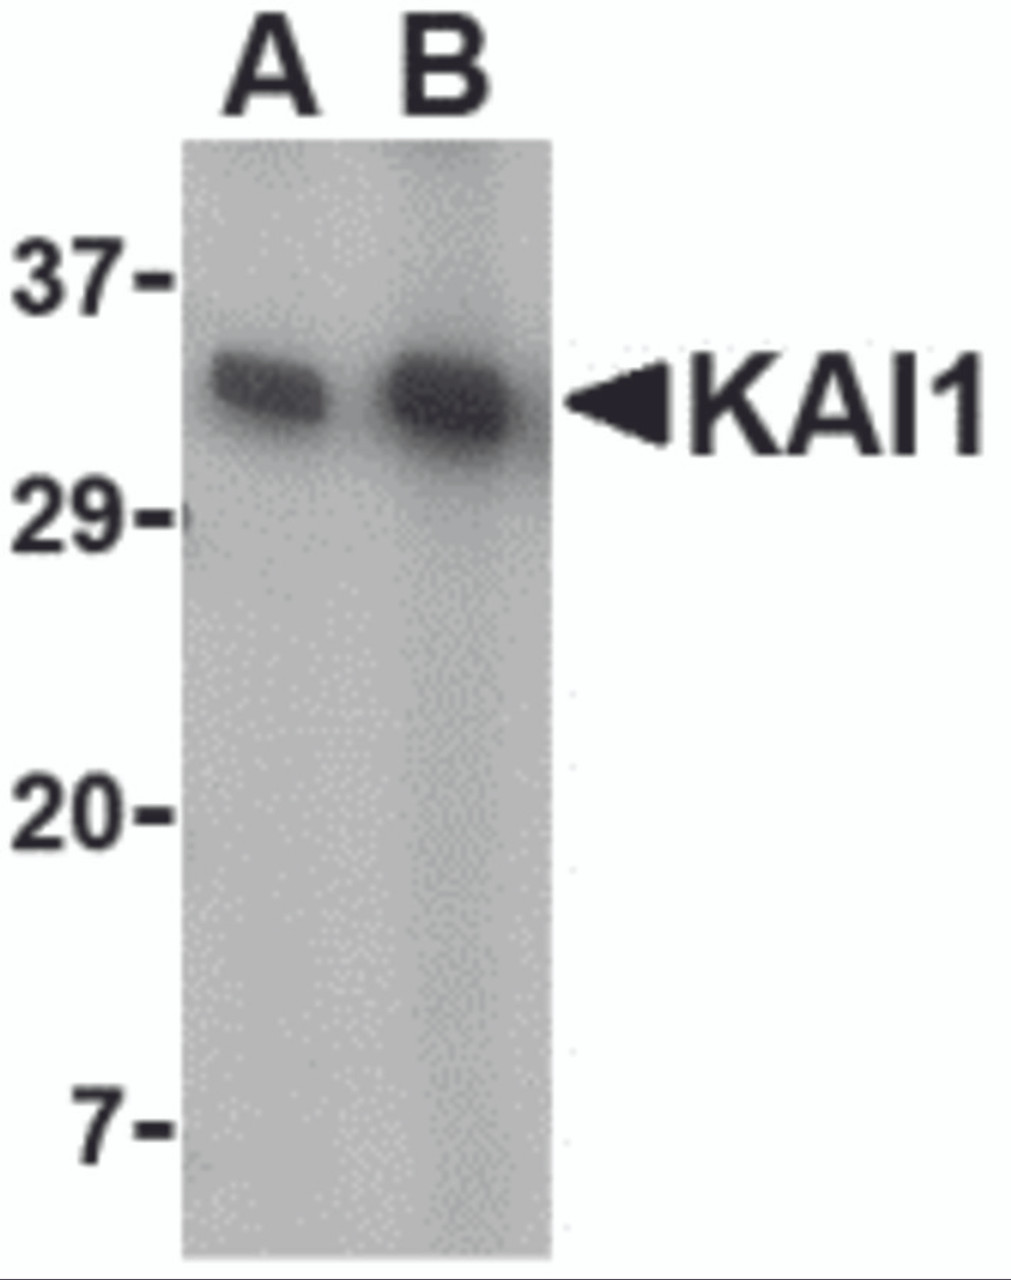 Western blot analysis of KAI1 in A549 cell lysate with KAI1 antibody at (A) 0.5 and (B) 1 &#956;g/mL.